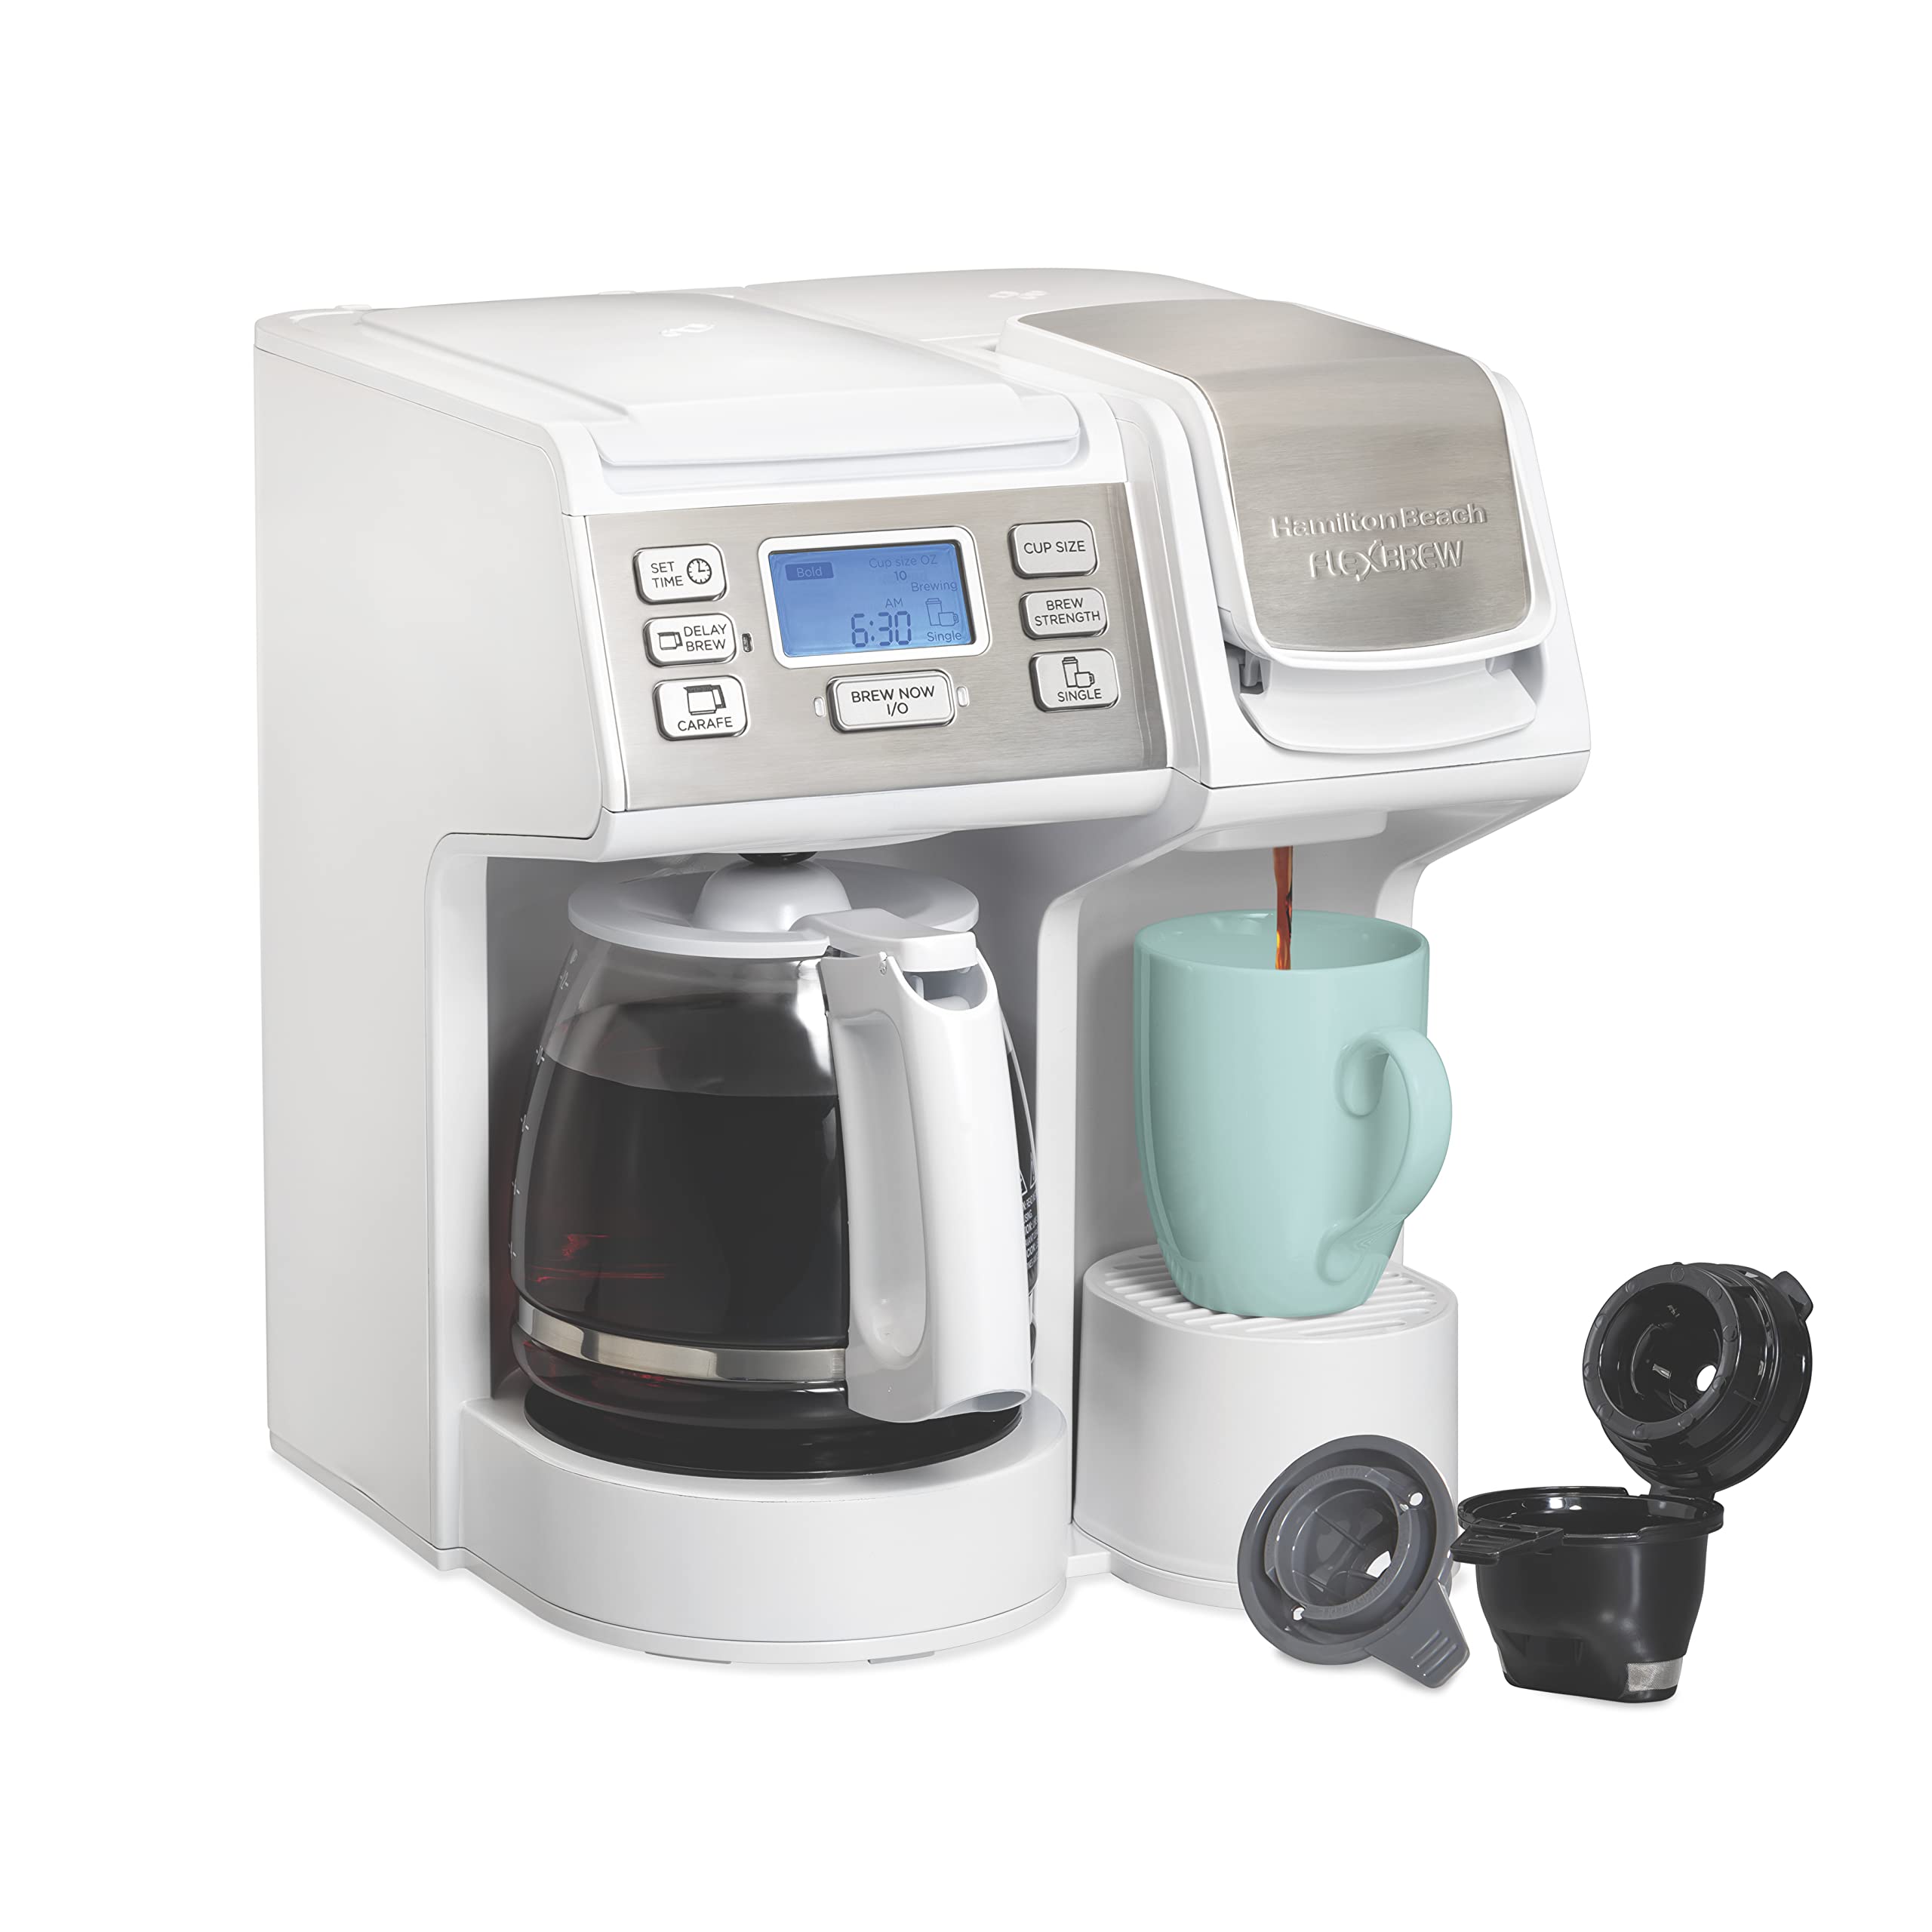 Hamilton Beach 49917 FlexBrew Trio 2-Way Coffee Maker, Compatible with K-Cup Pods or Grounds, Combo, Single Serve & Full 12c Pot, White with Stainless Steel Accents, Fast Brewing